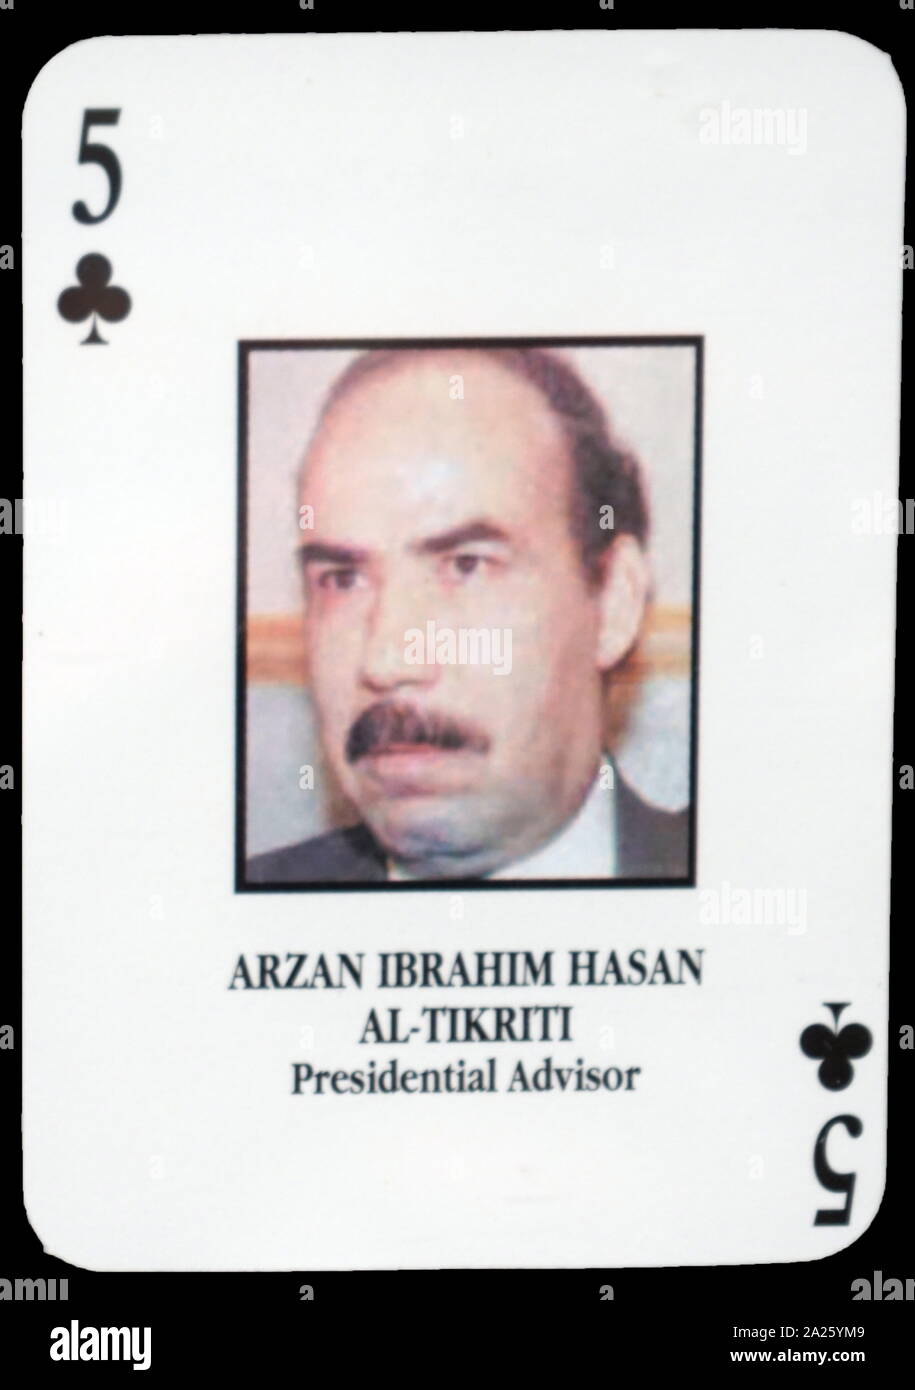 Most-wanted Iraqi playing cards - Arzan Ibrahim Hasan Al-Tikriti (Presidential Advisor). The U.S. military developed a set of playing cards to help troop identify the most-wanted members of President Saddam Hussein's government during the 2003 invasion of Iraq. Stock Photo